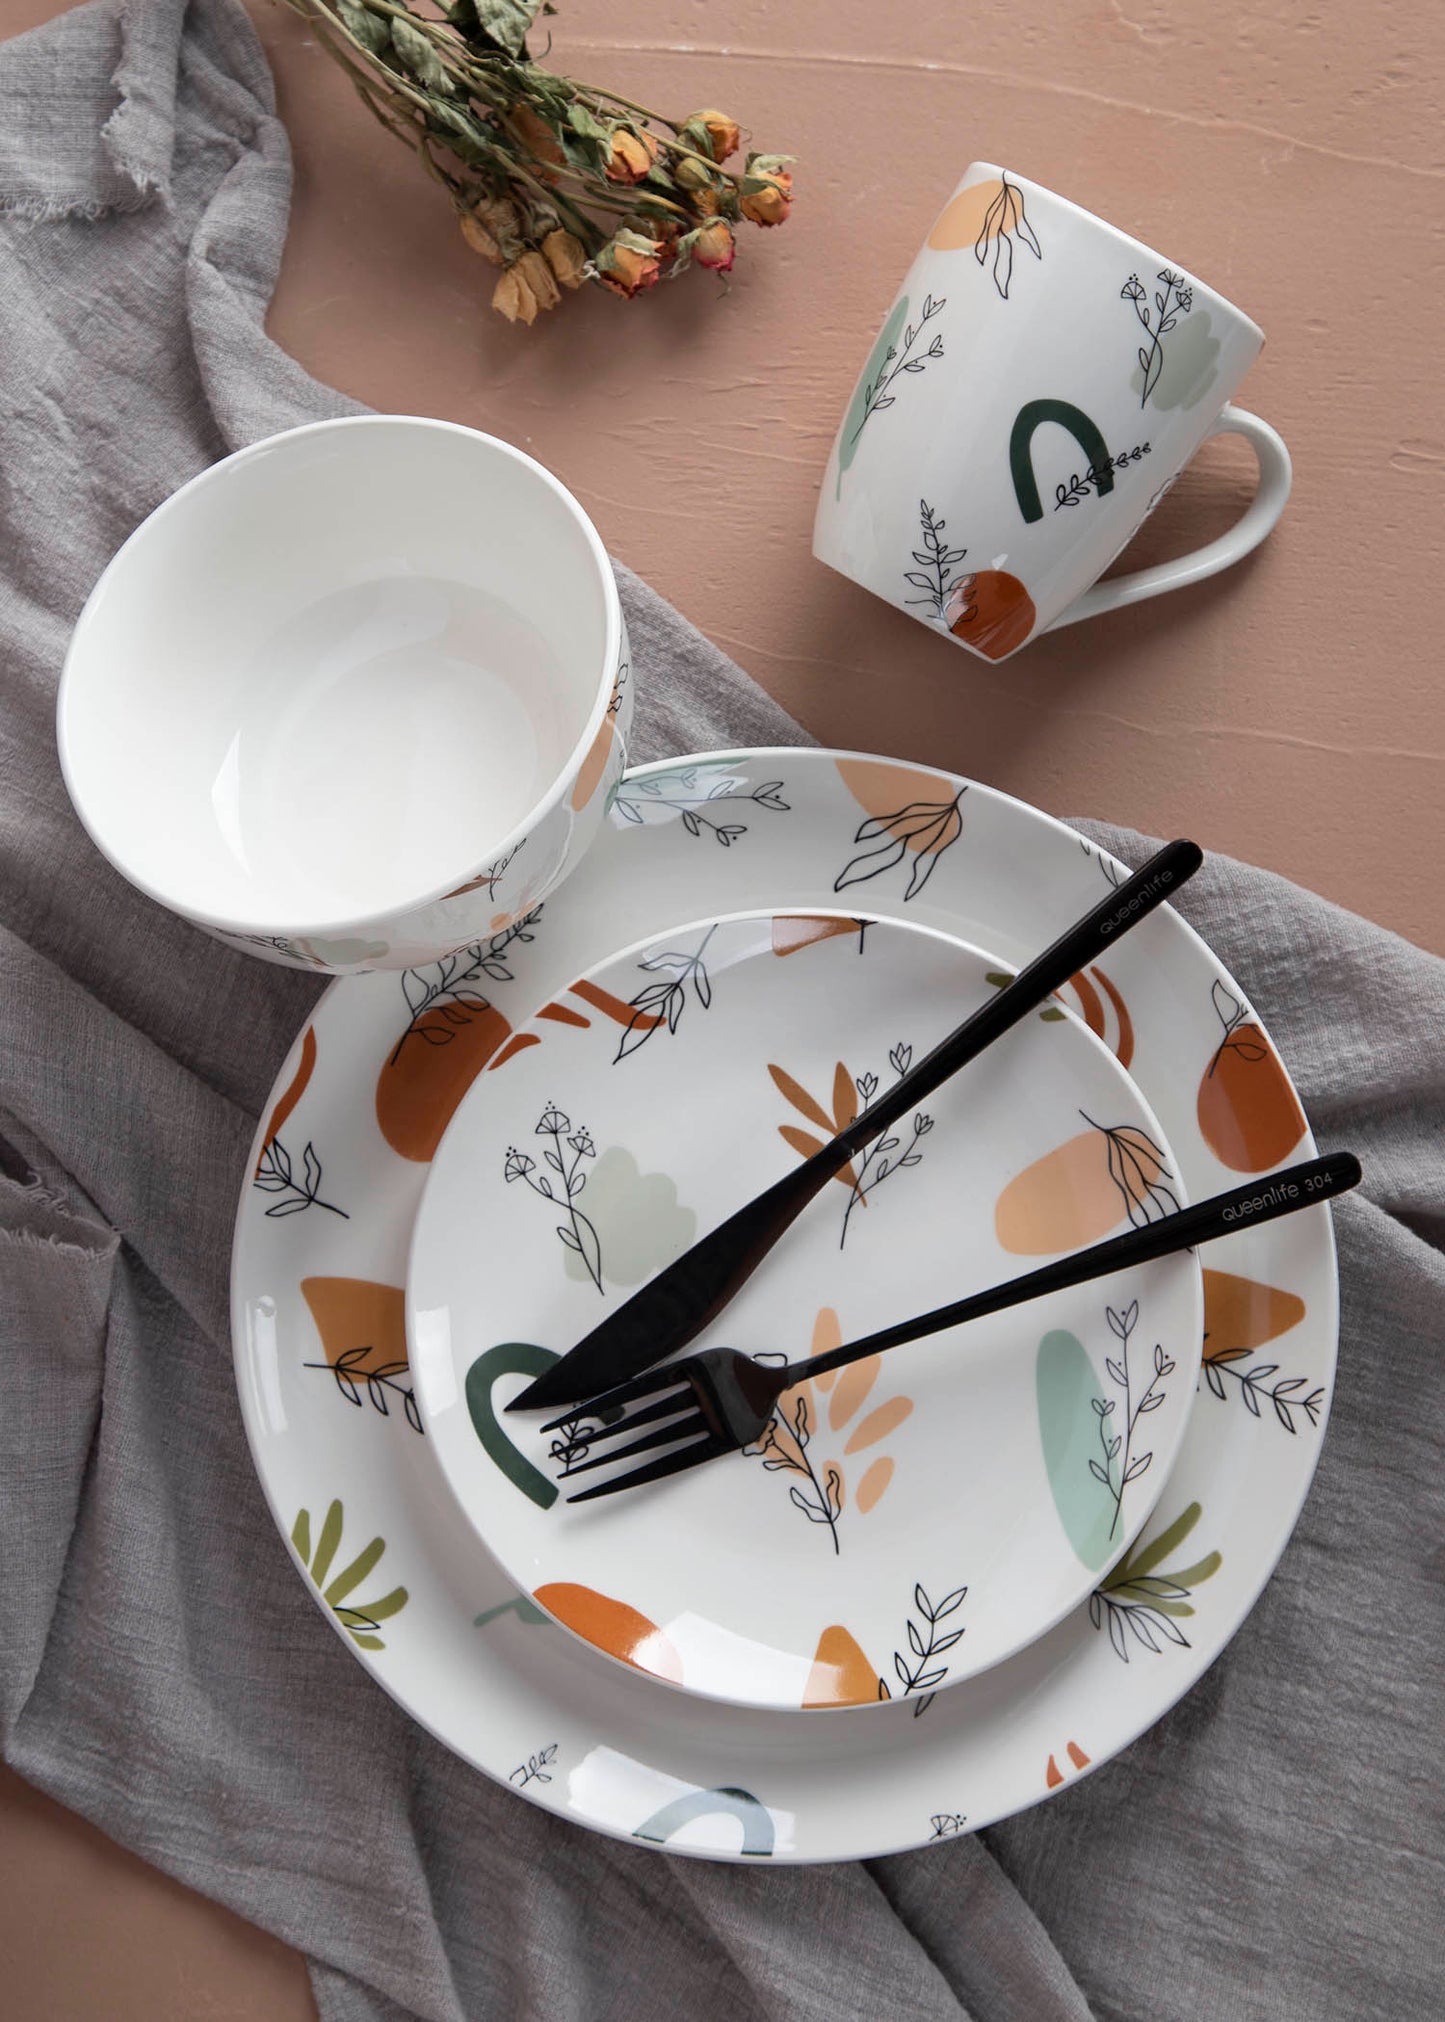 Four Seasons Abstract Plant Pattern Decal Plate Bowl Cup Porcelain Tableware | Item NO.: 96C-029